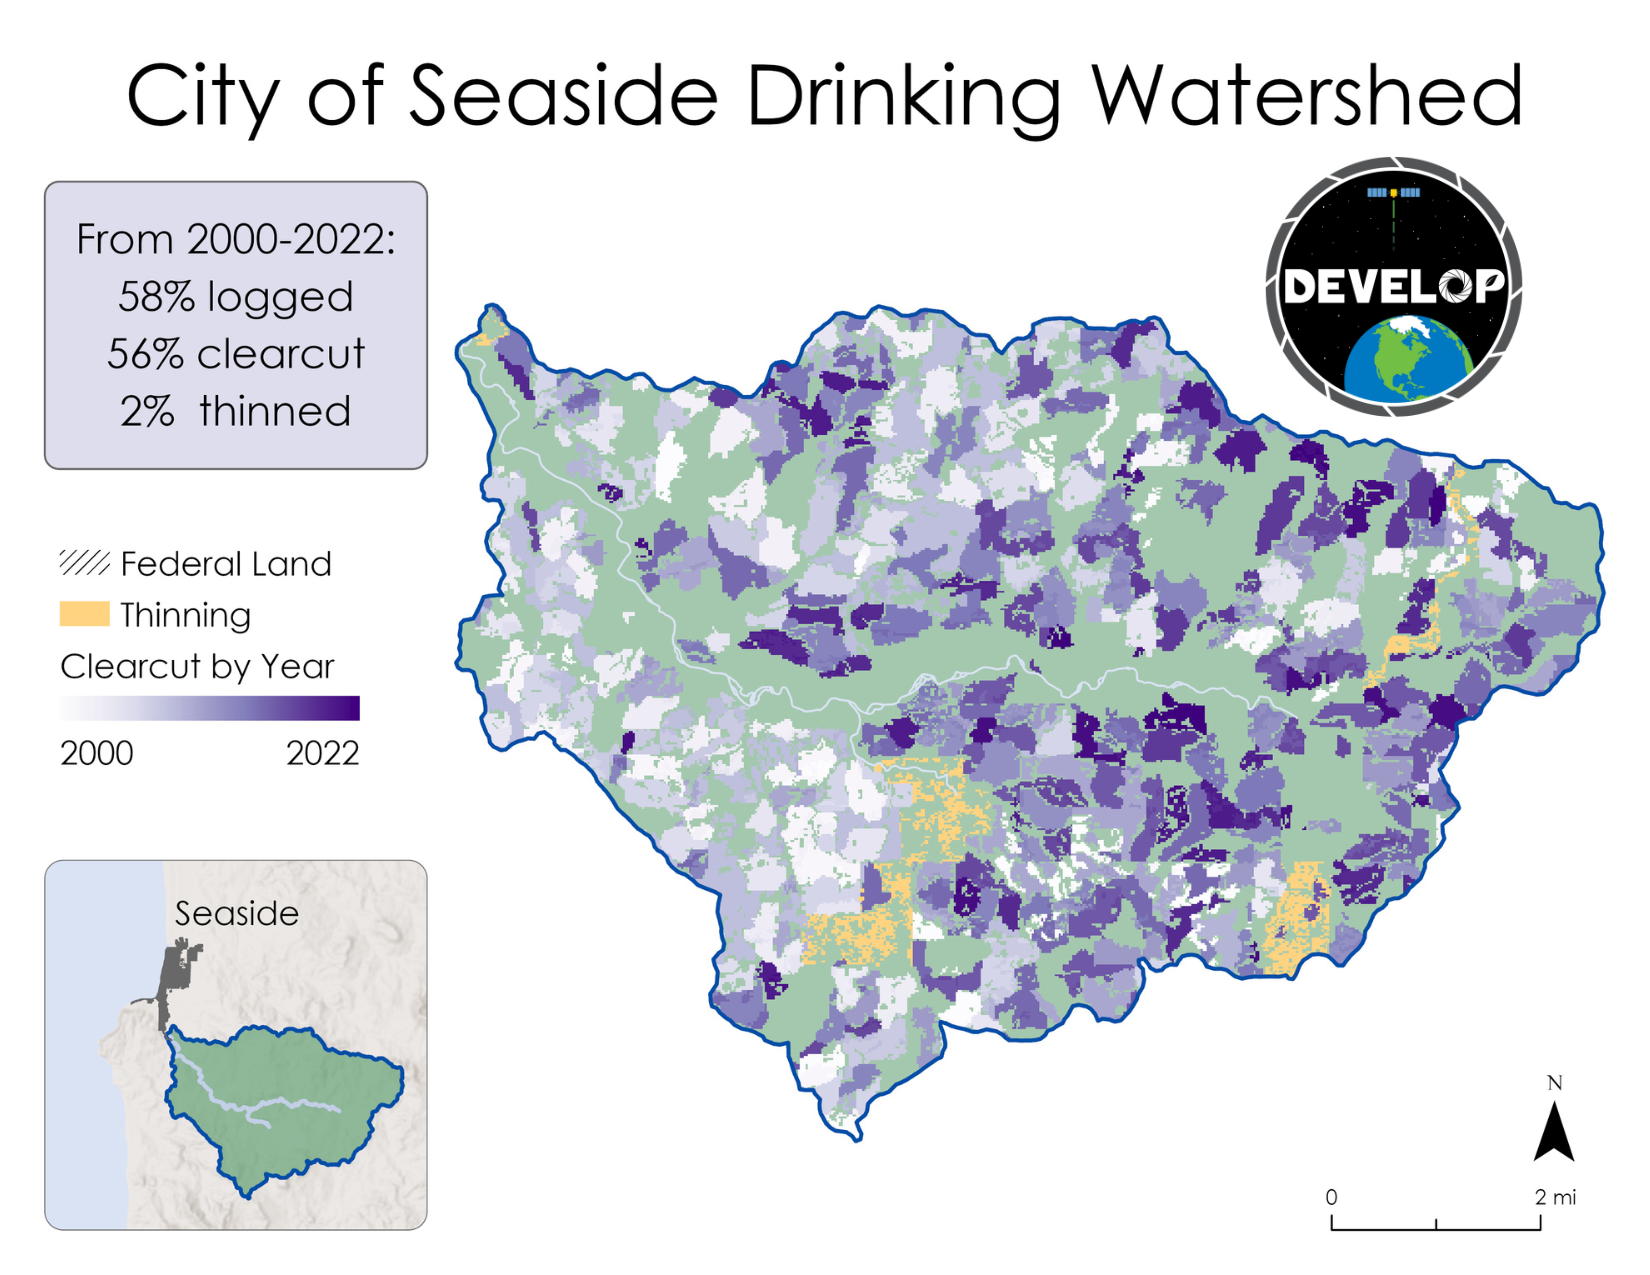 City of Seaside Watershed drinking water map from the NASA Report